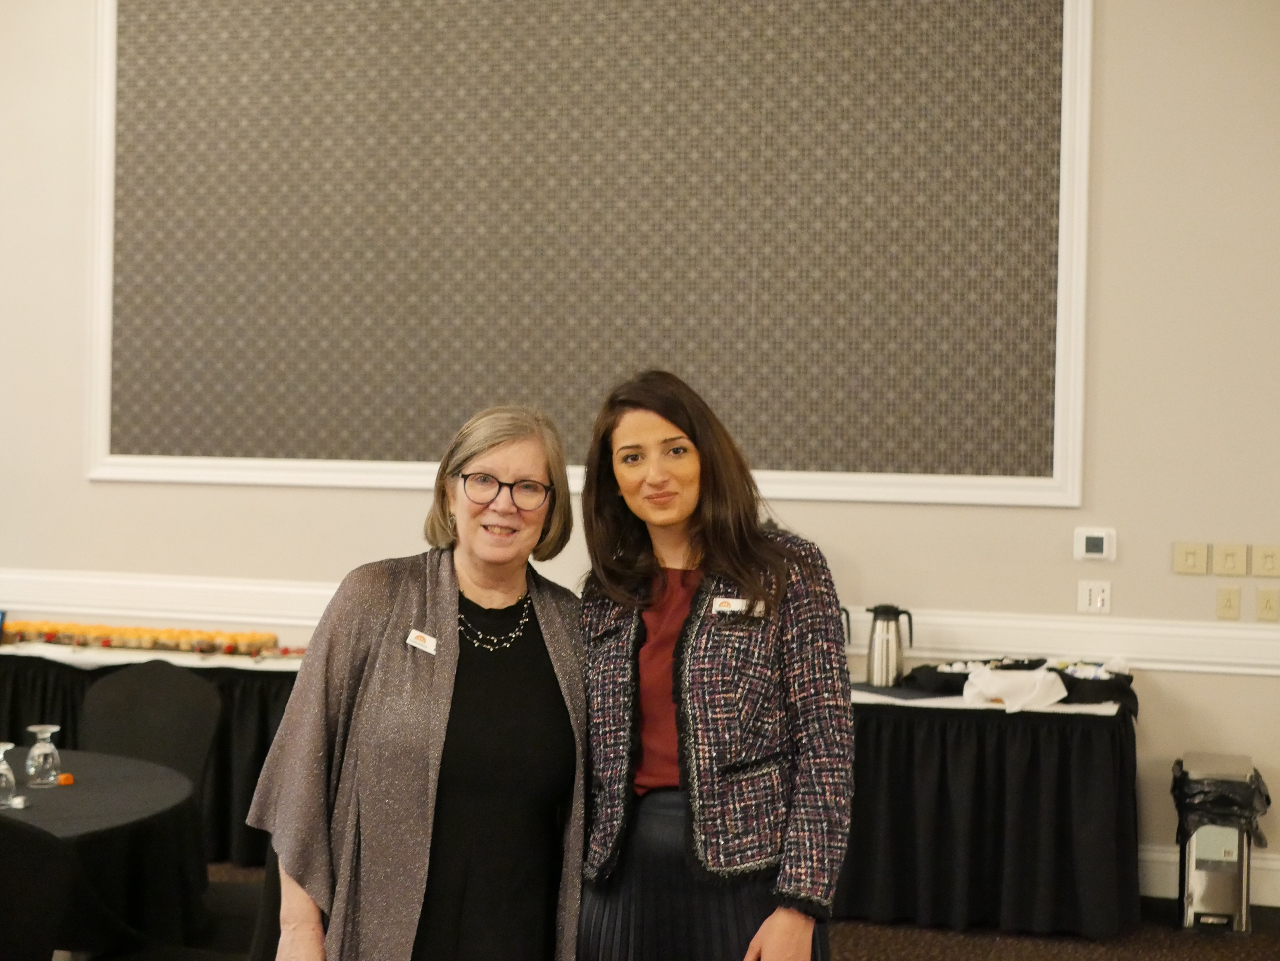 This Photo features WRFN Executive Director Sue Simpson and WRFN Fund Development Officer Oula Almadhoun, smiling side by side. Sue wears a grey shell with a black dress, and Oula wears a grey overcoat and has on a burgundy blouse.